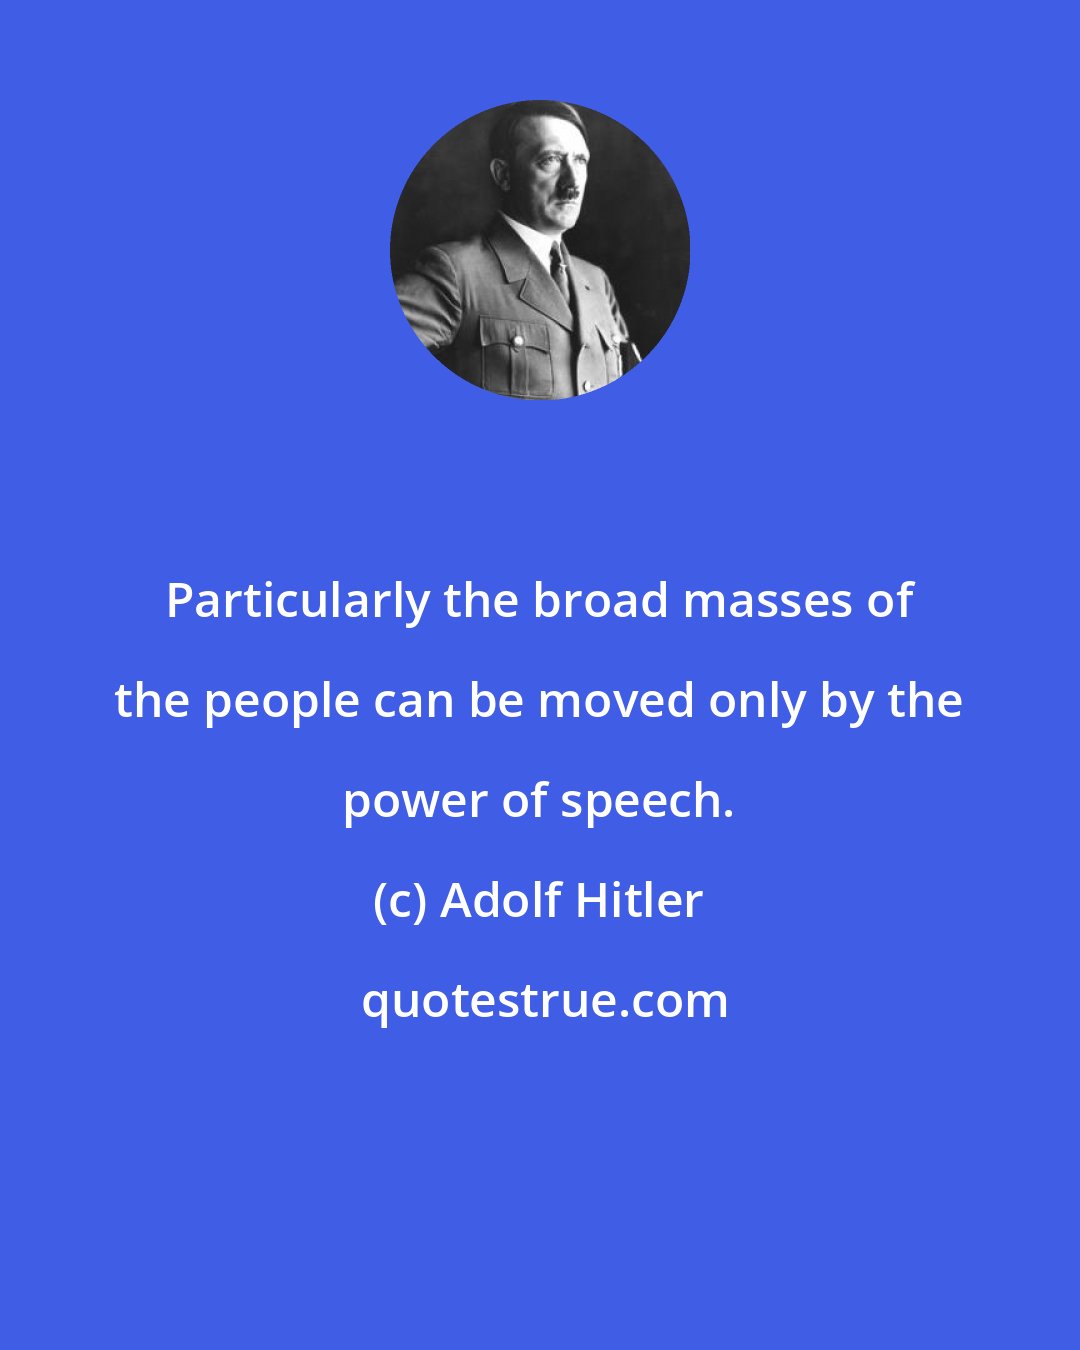 Adolf Hitler: Particularly the broad masses of the people can be moved only by the power of speech.